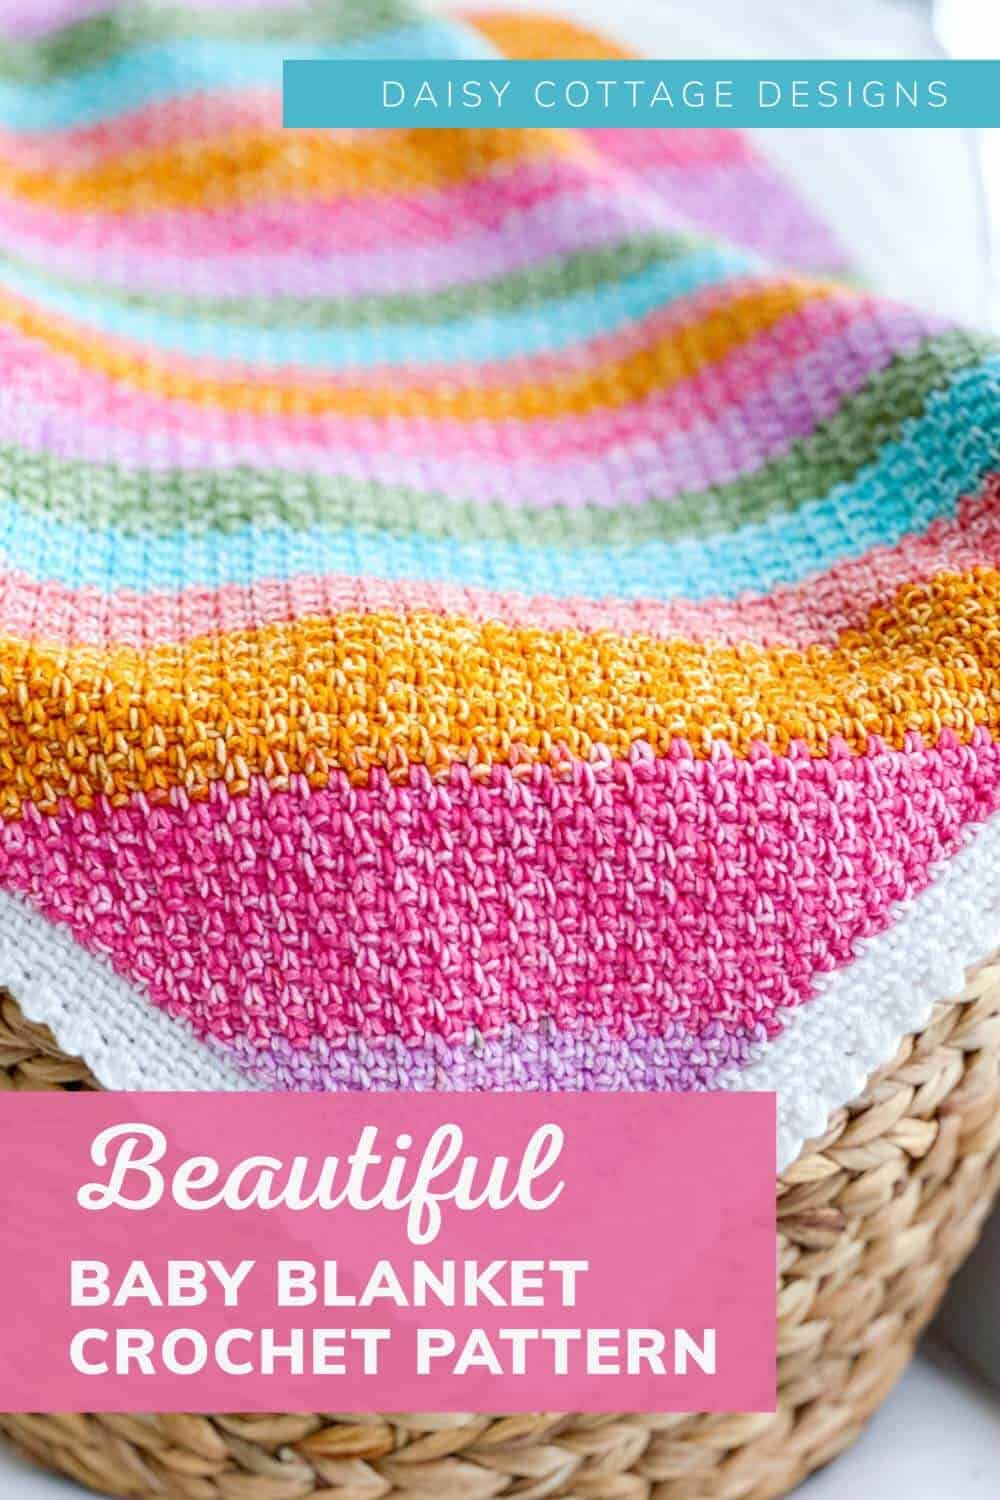 Use this free baby blanket crochet pattern from Daisy Cottage Designs  to create gorgeous crochet baby blankets. This tutorial is the perfect addition to your collection of free crochet patterns.